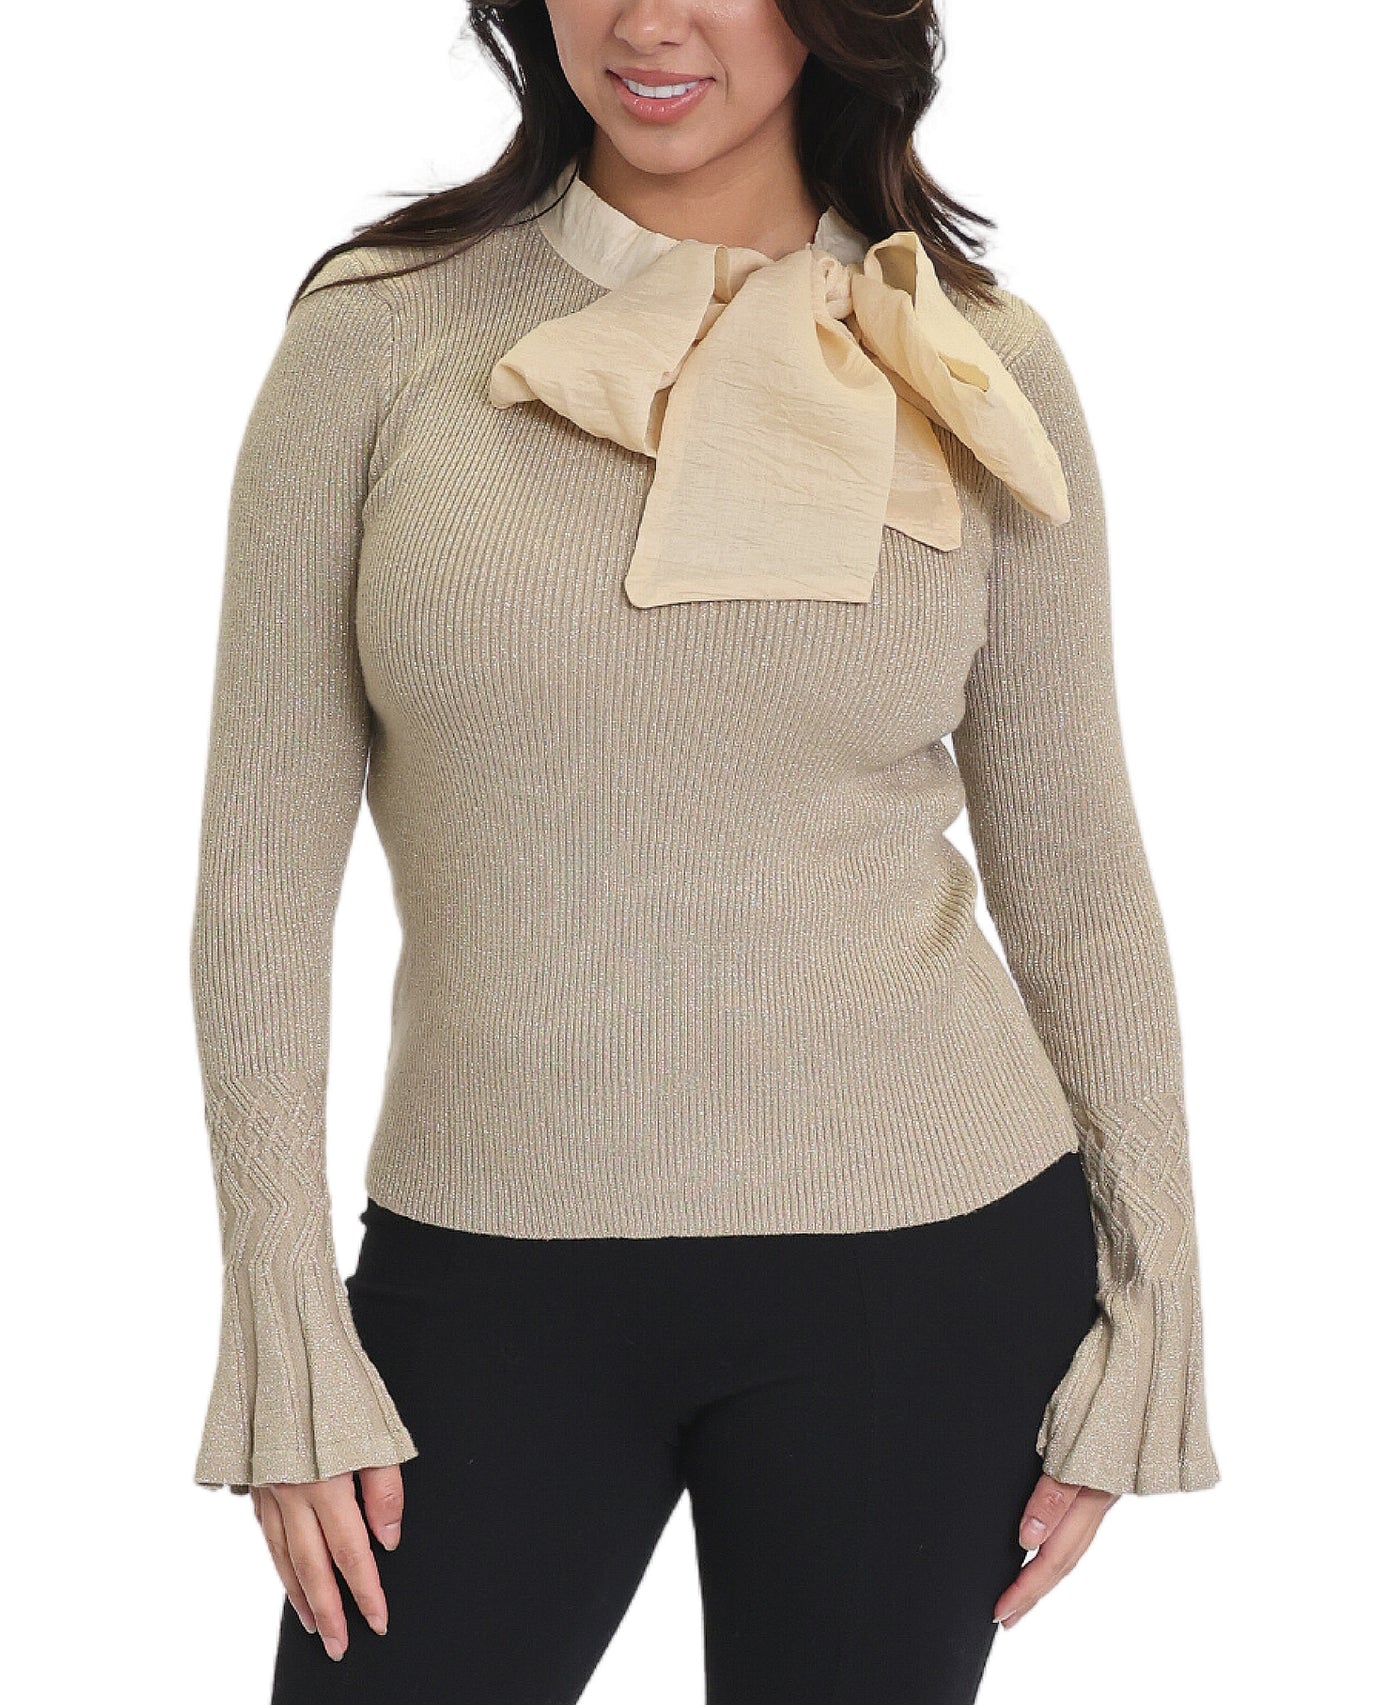 Shimmer Sweater w/ Bow image 1